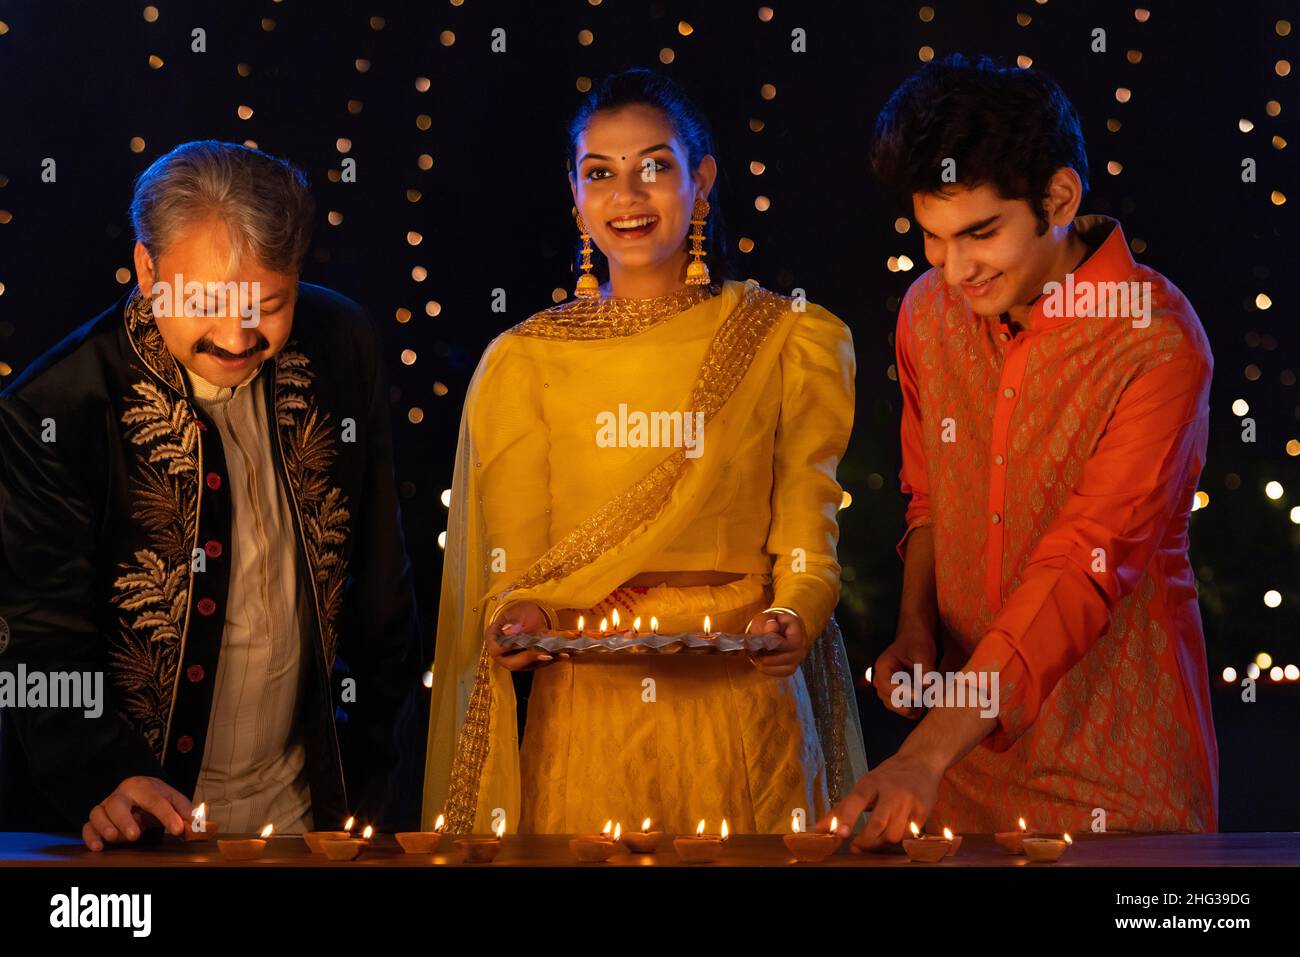 Indian family decorating house by diyas on the occasion of Diwali Stock Photo